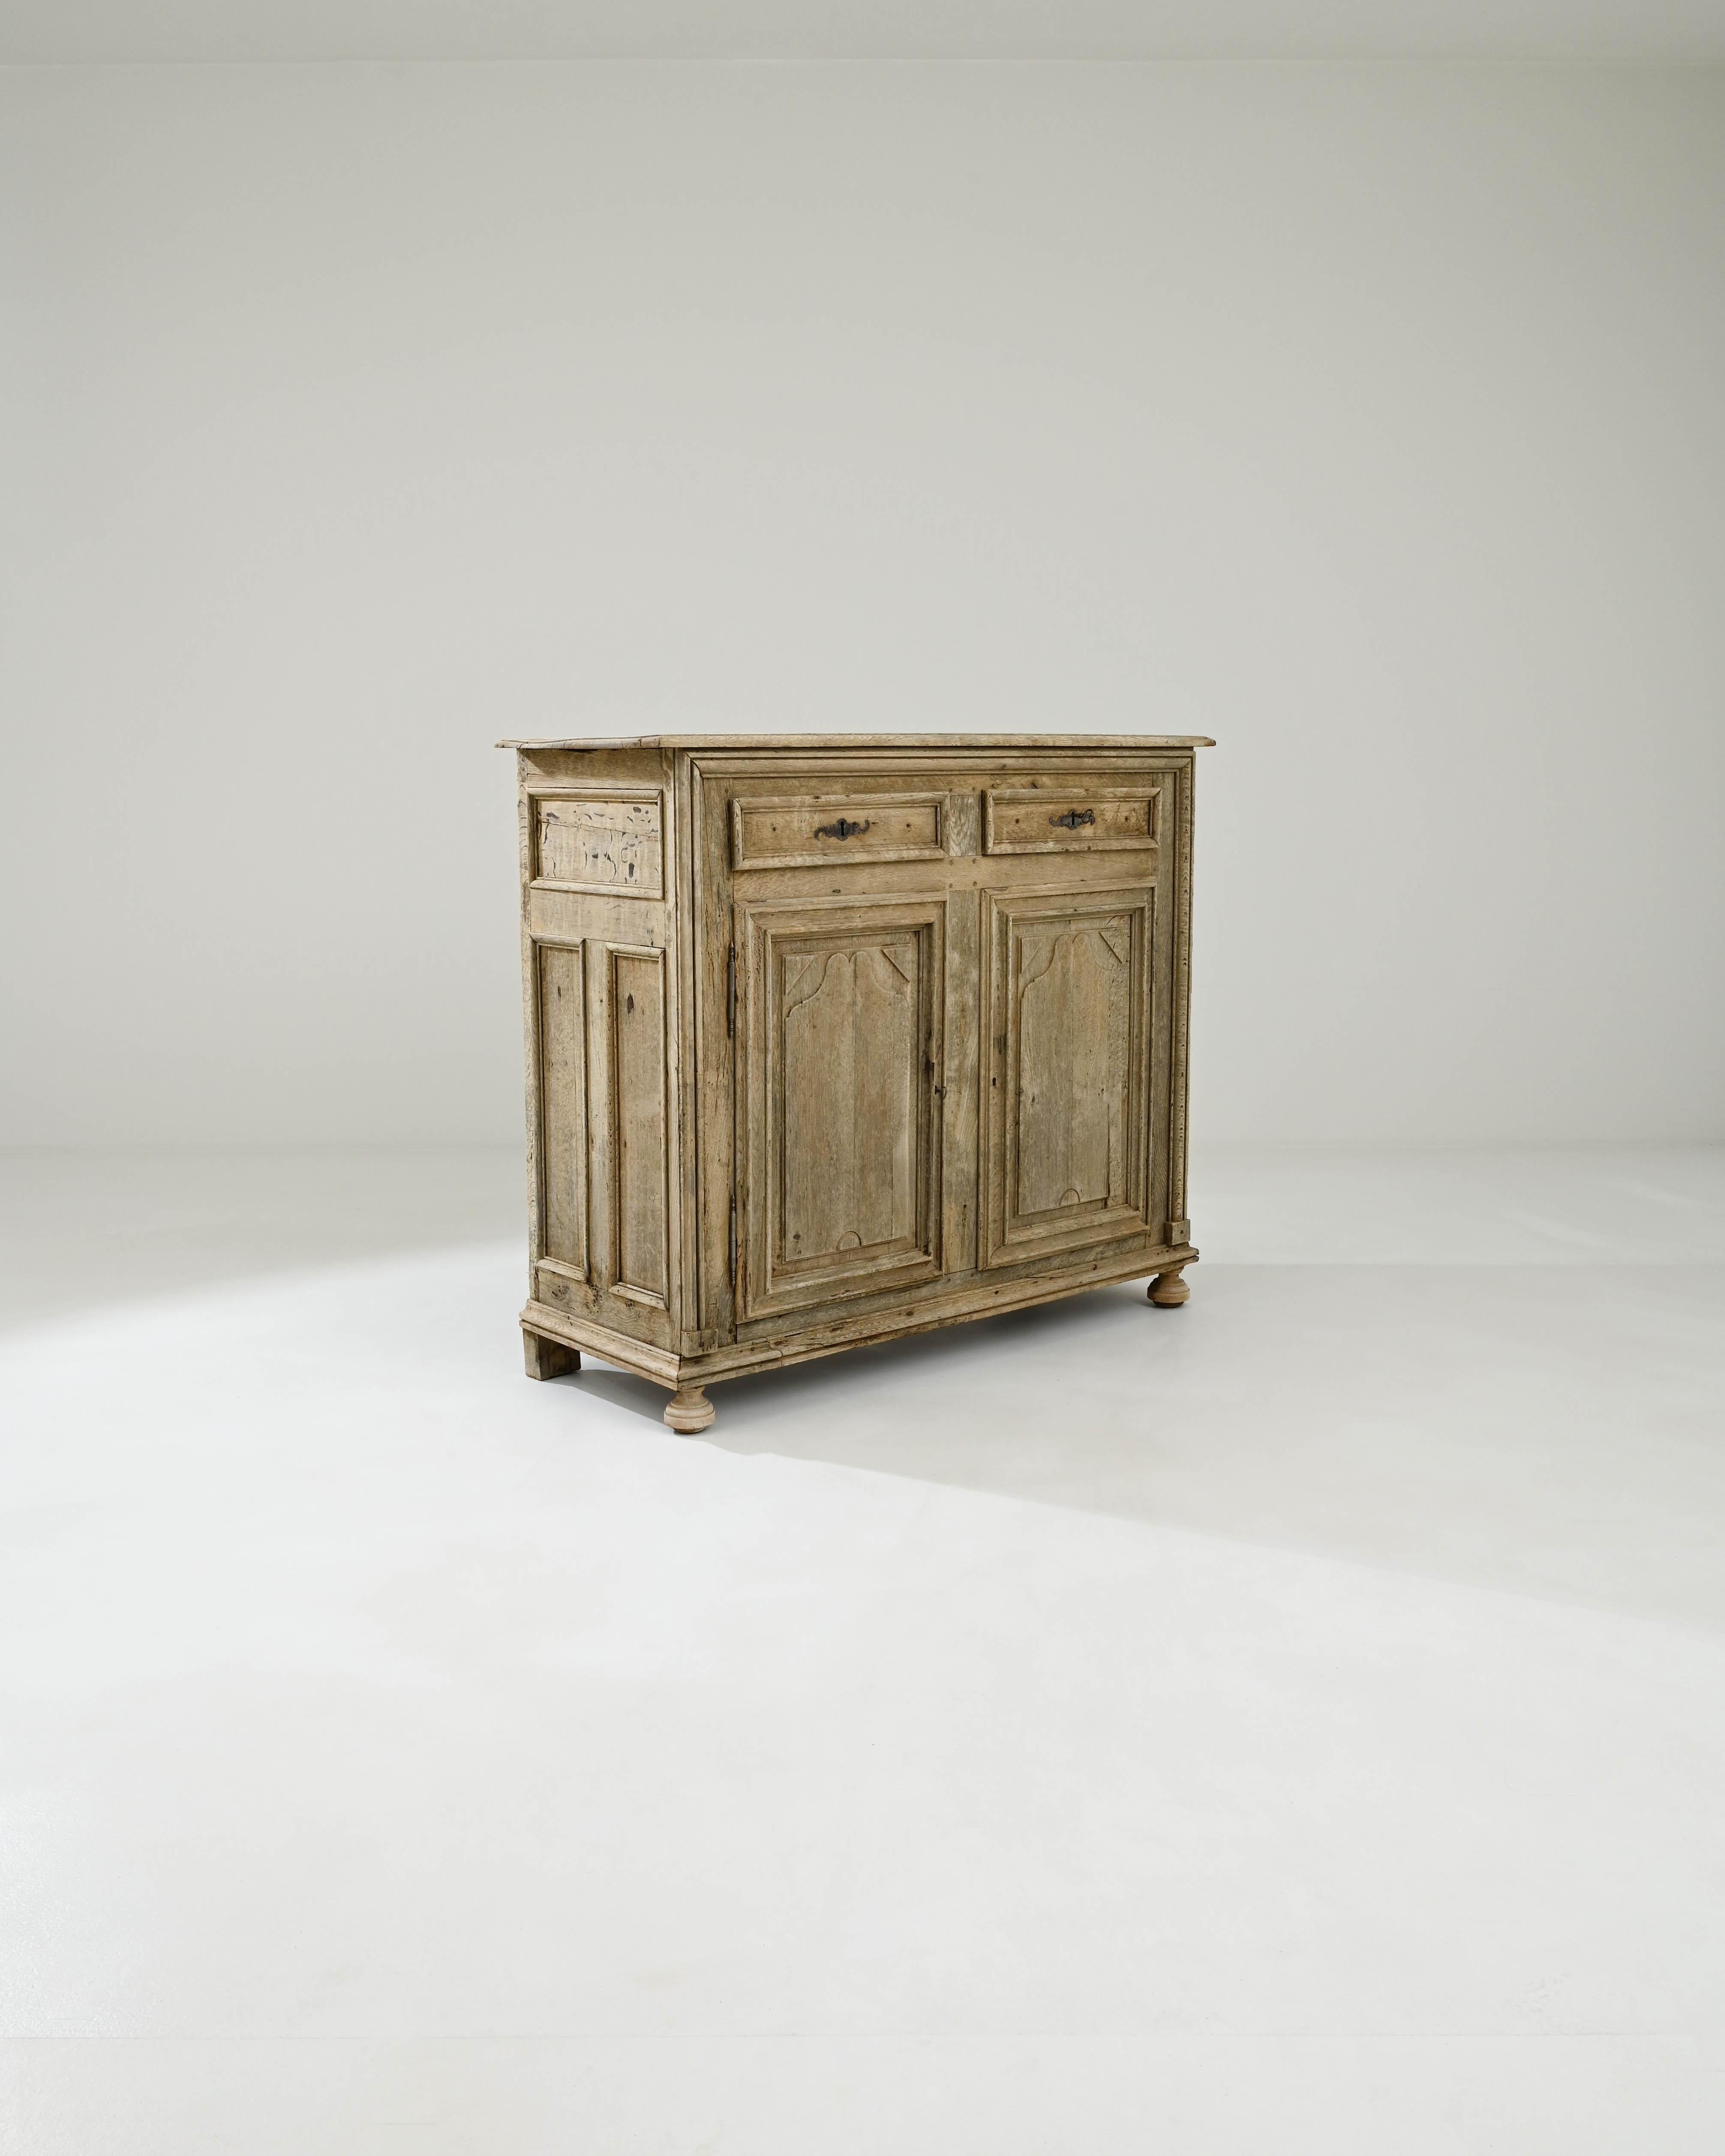 A wooden buffet created in 19th century France. Handsomely constructed and full of old-world crafty charm, this astute buffet offers a ray of regal light. The elaborately framed drawer paneling creates a succinct and geometrically pleasing